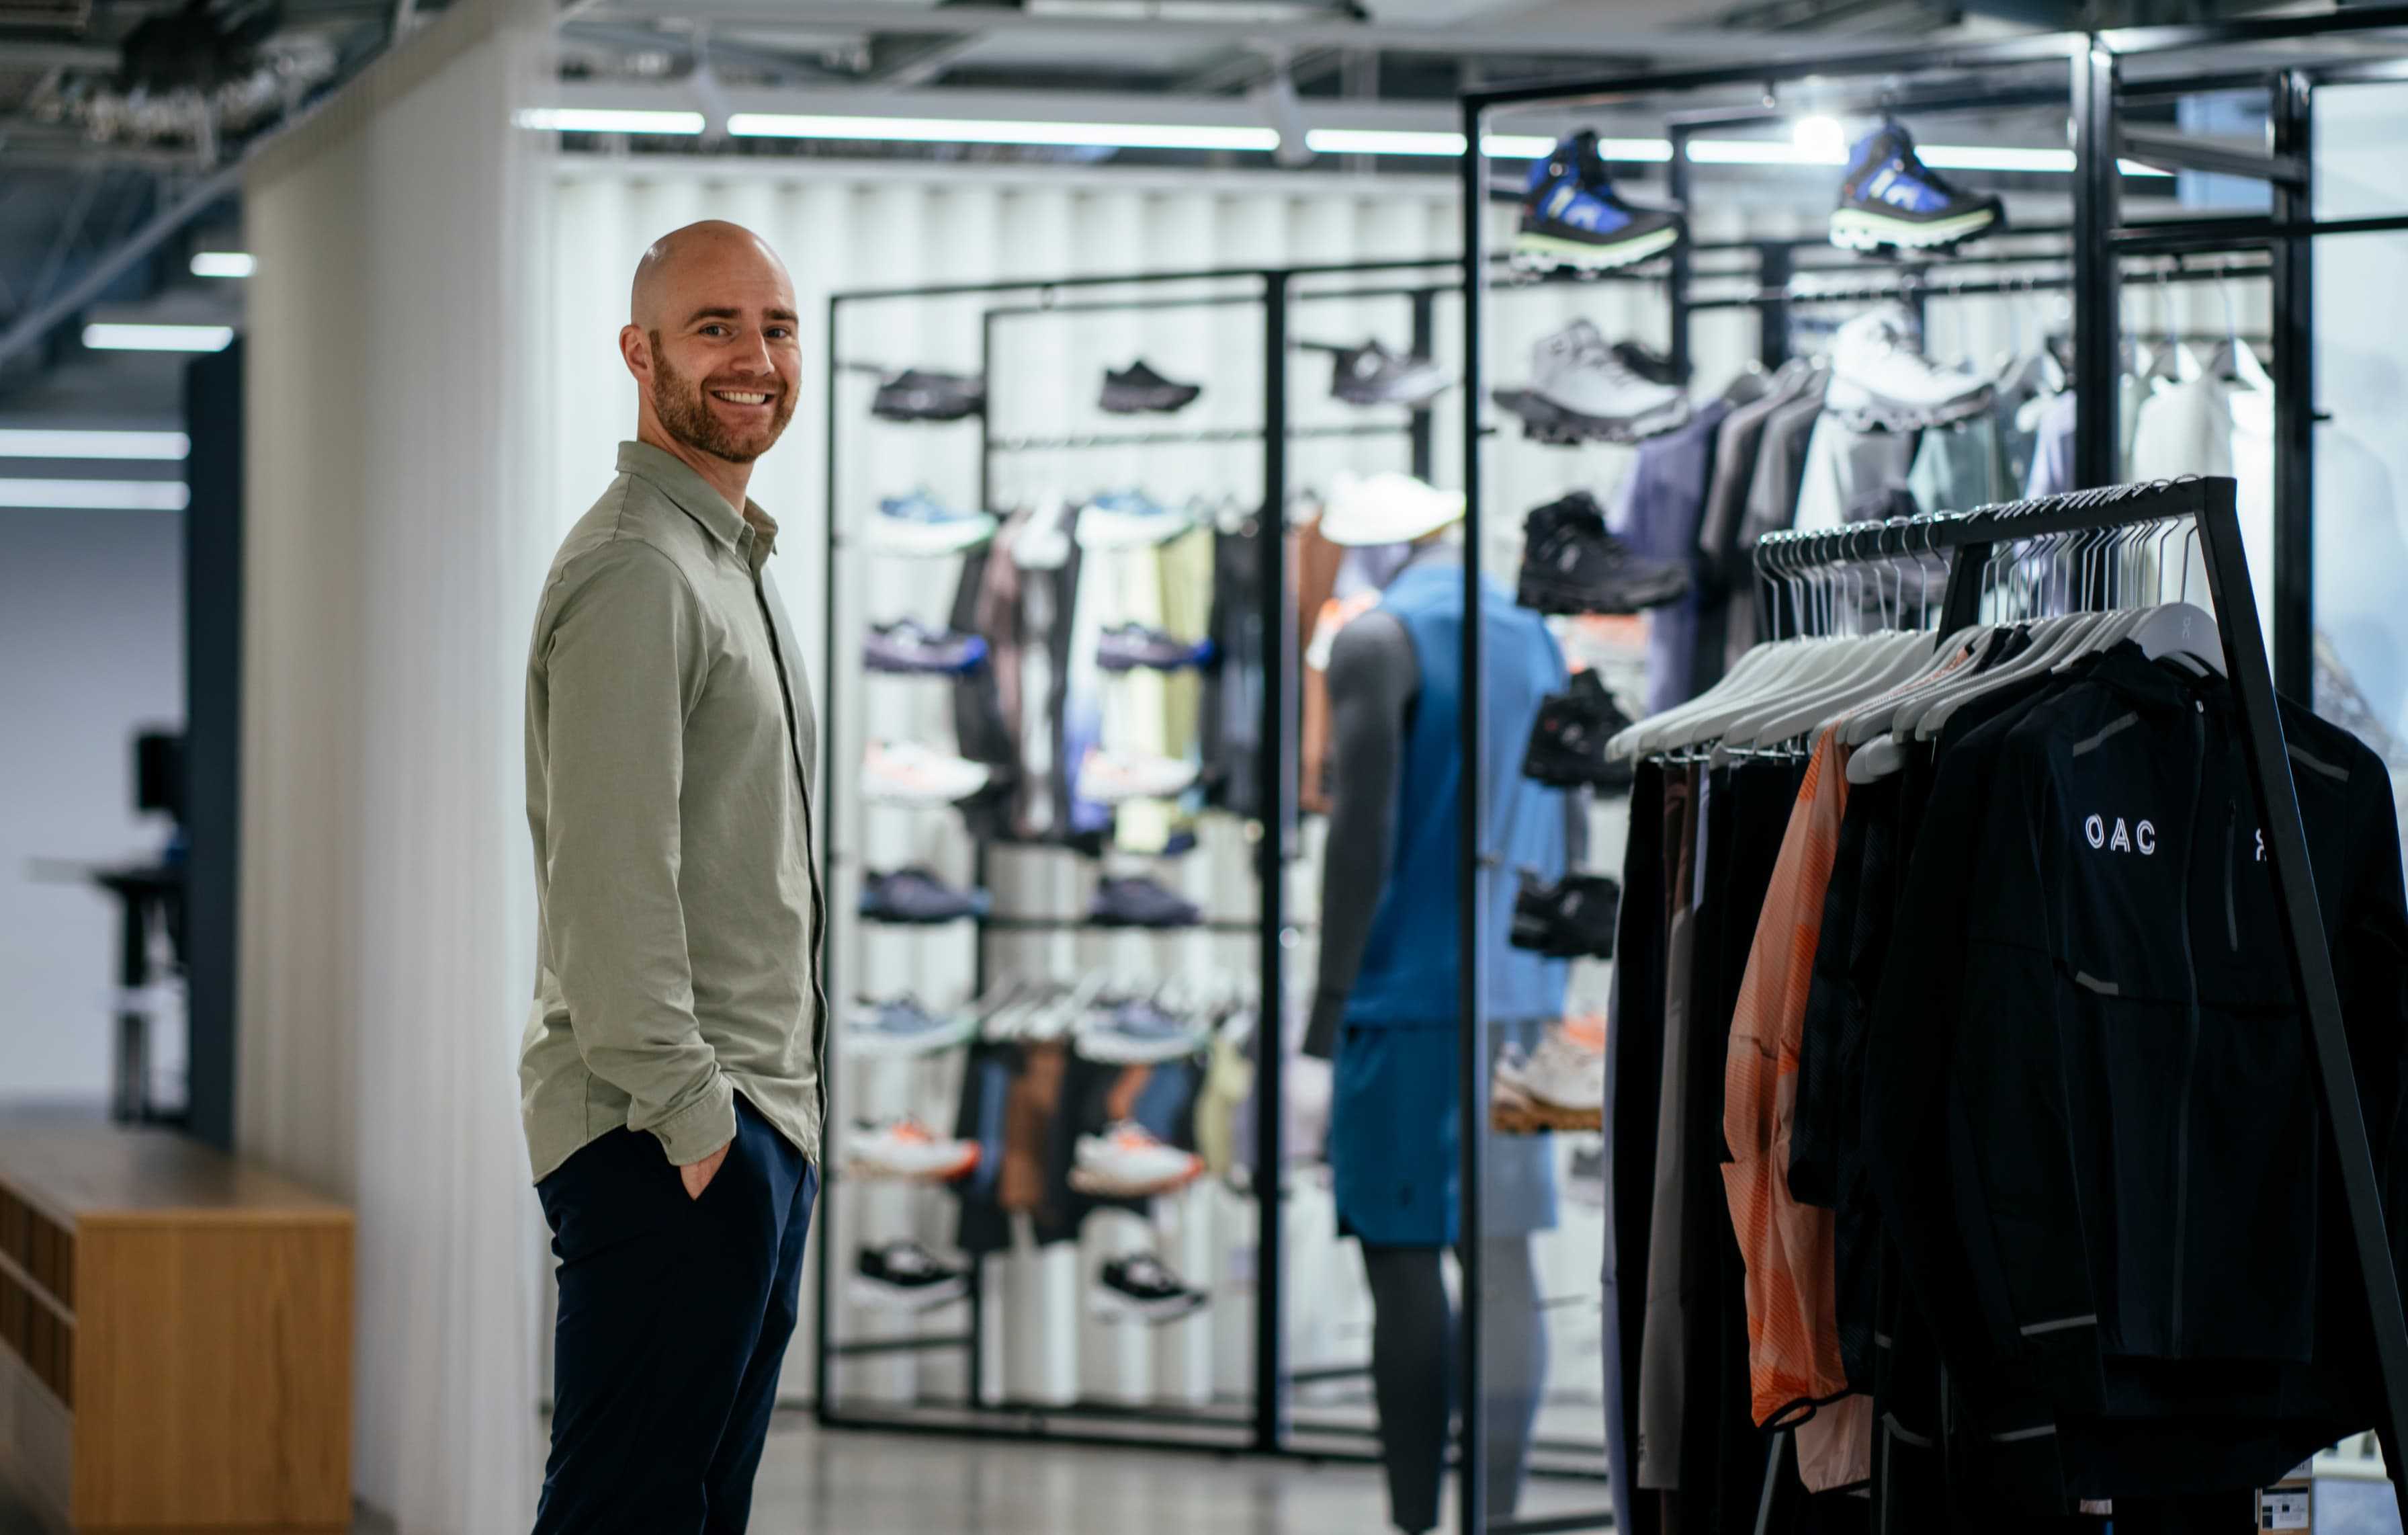 A man smiling whilst standing in an On store.